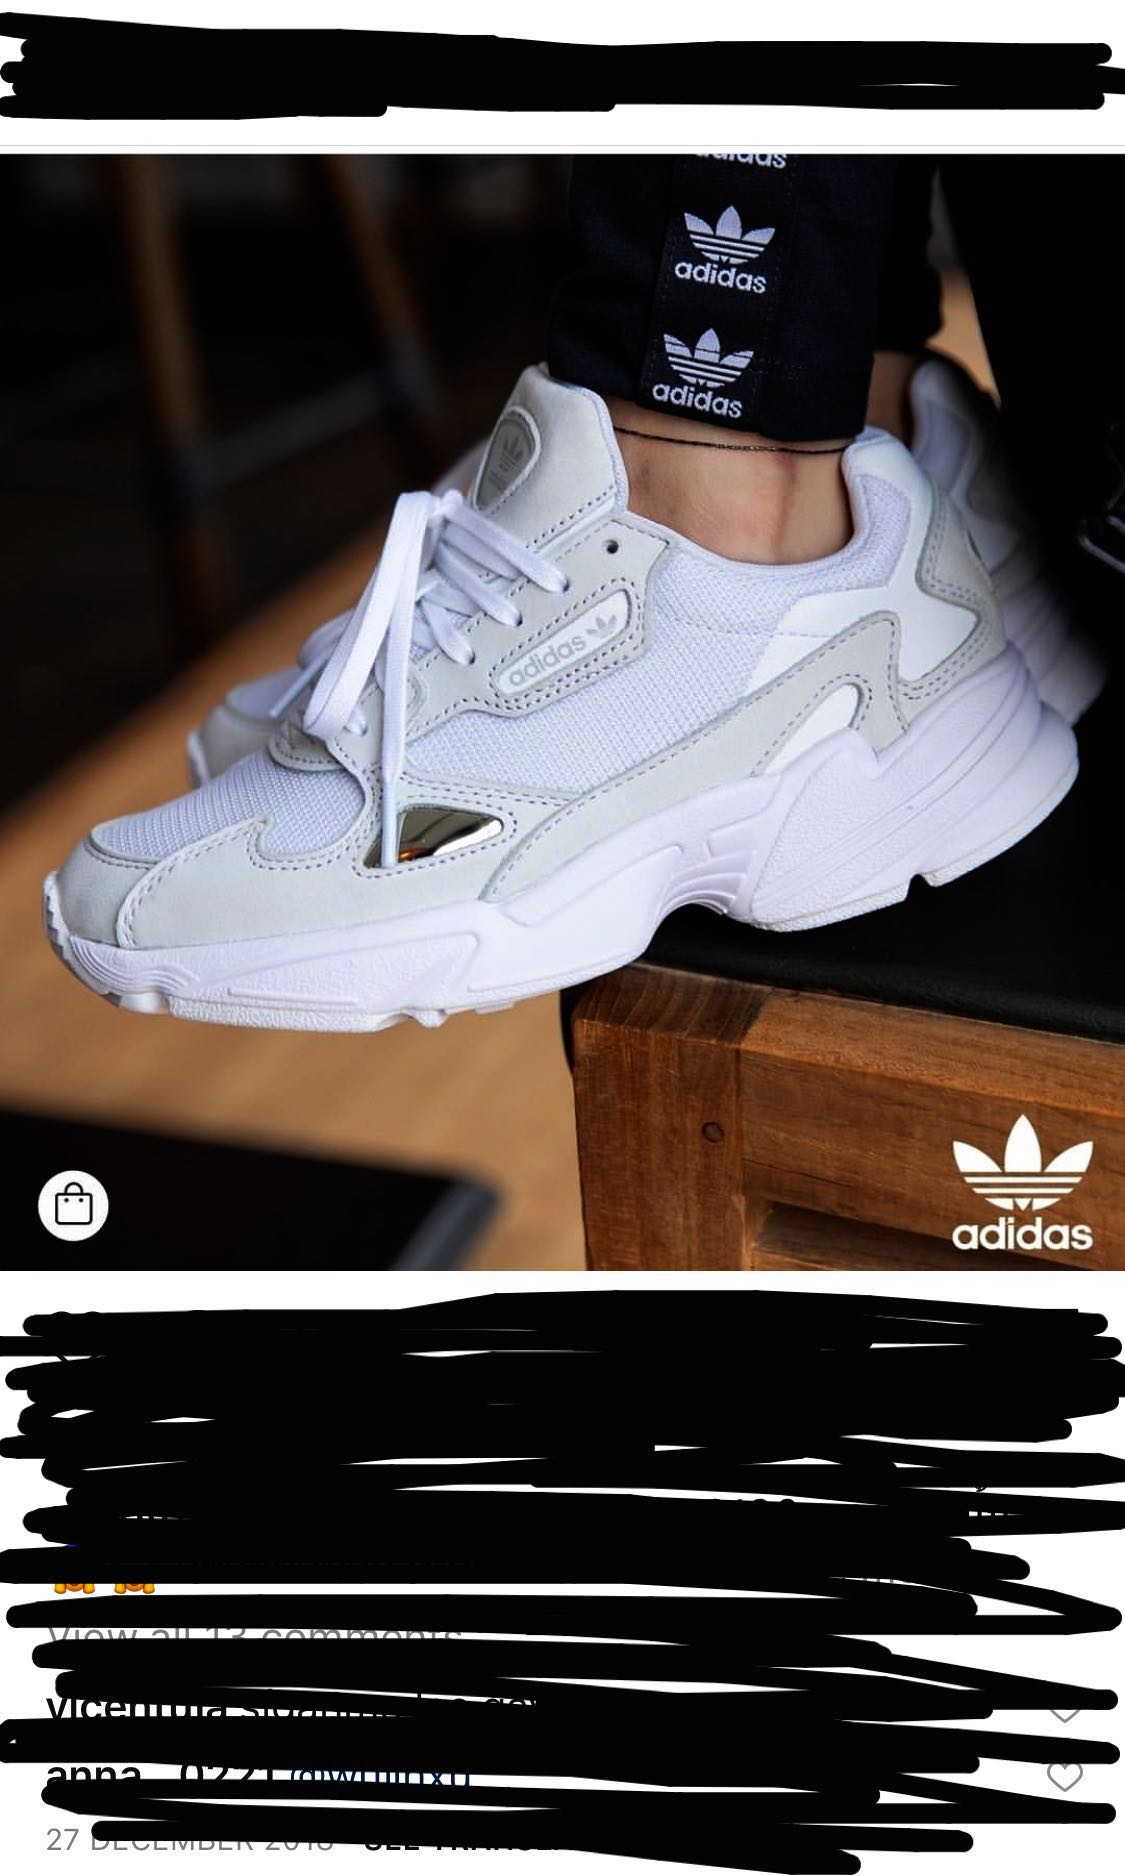 kylie's adidas shoes